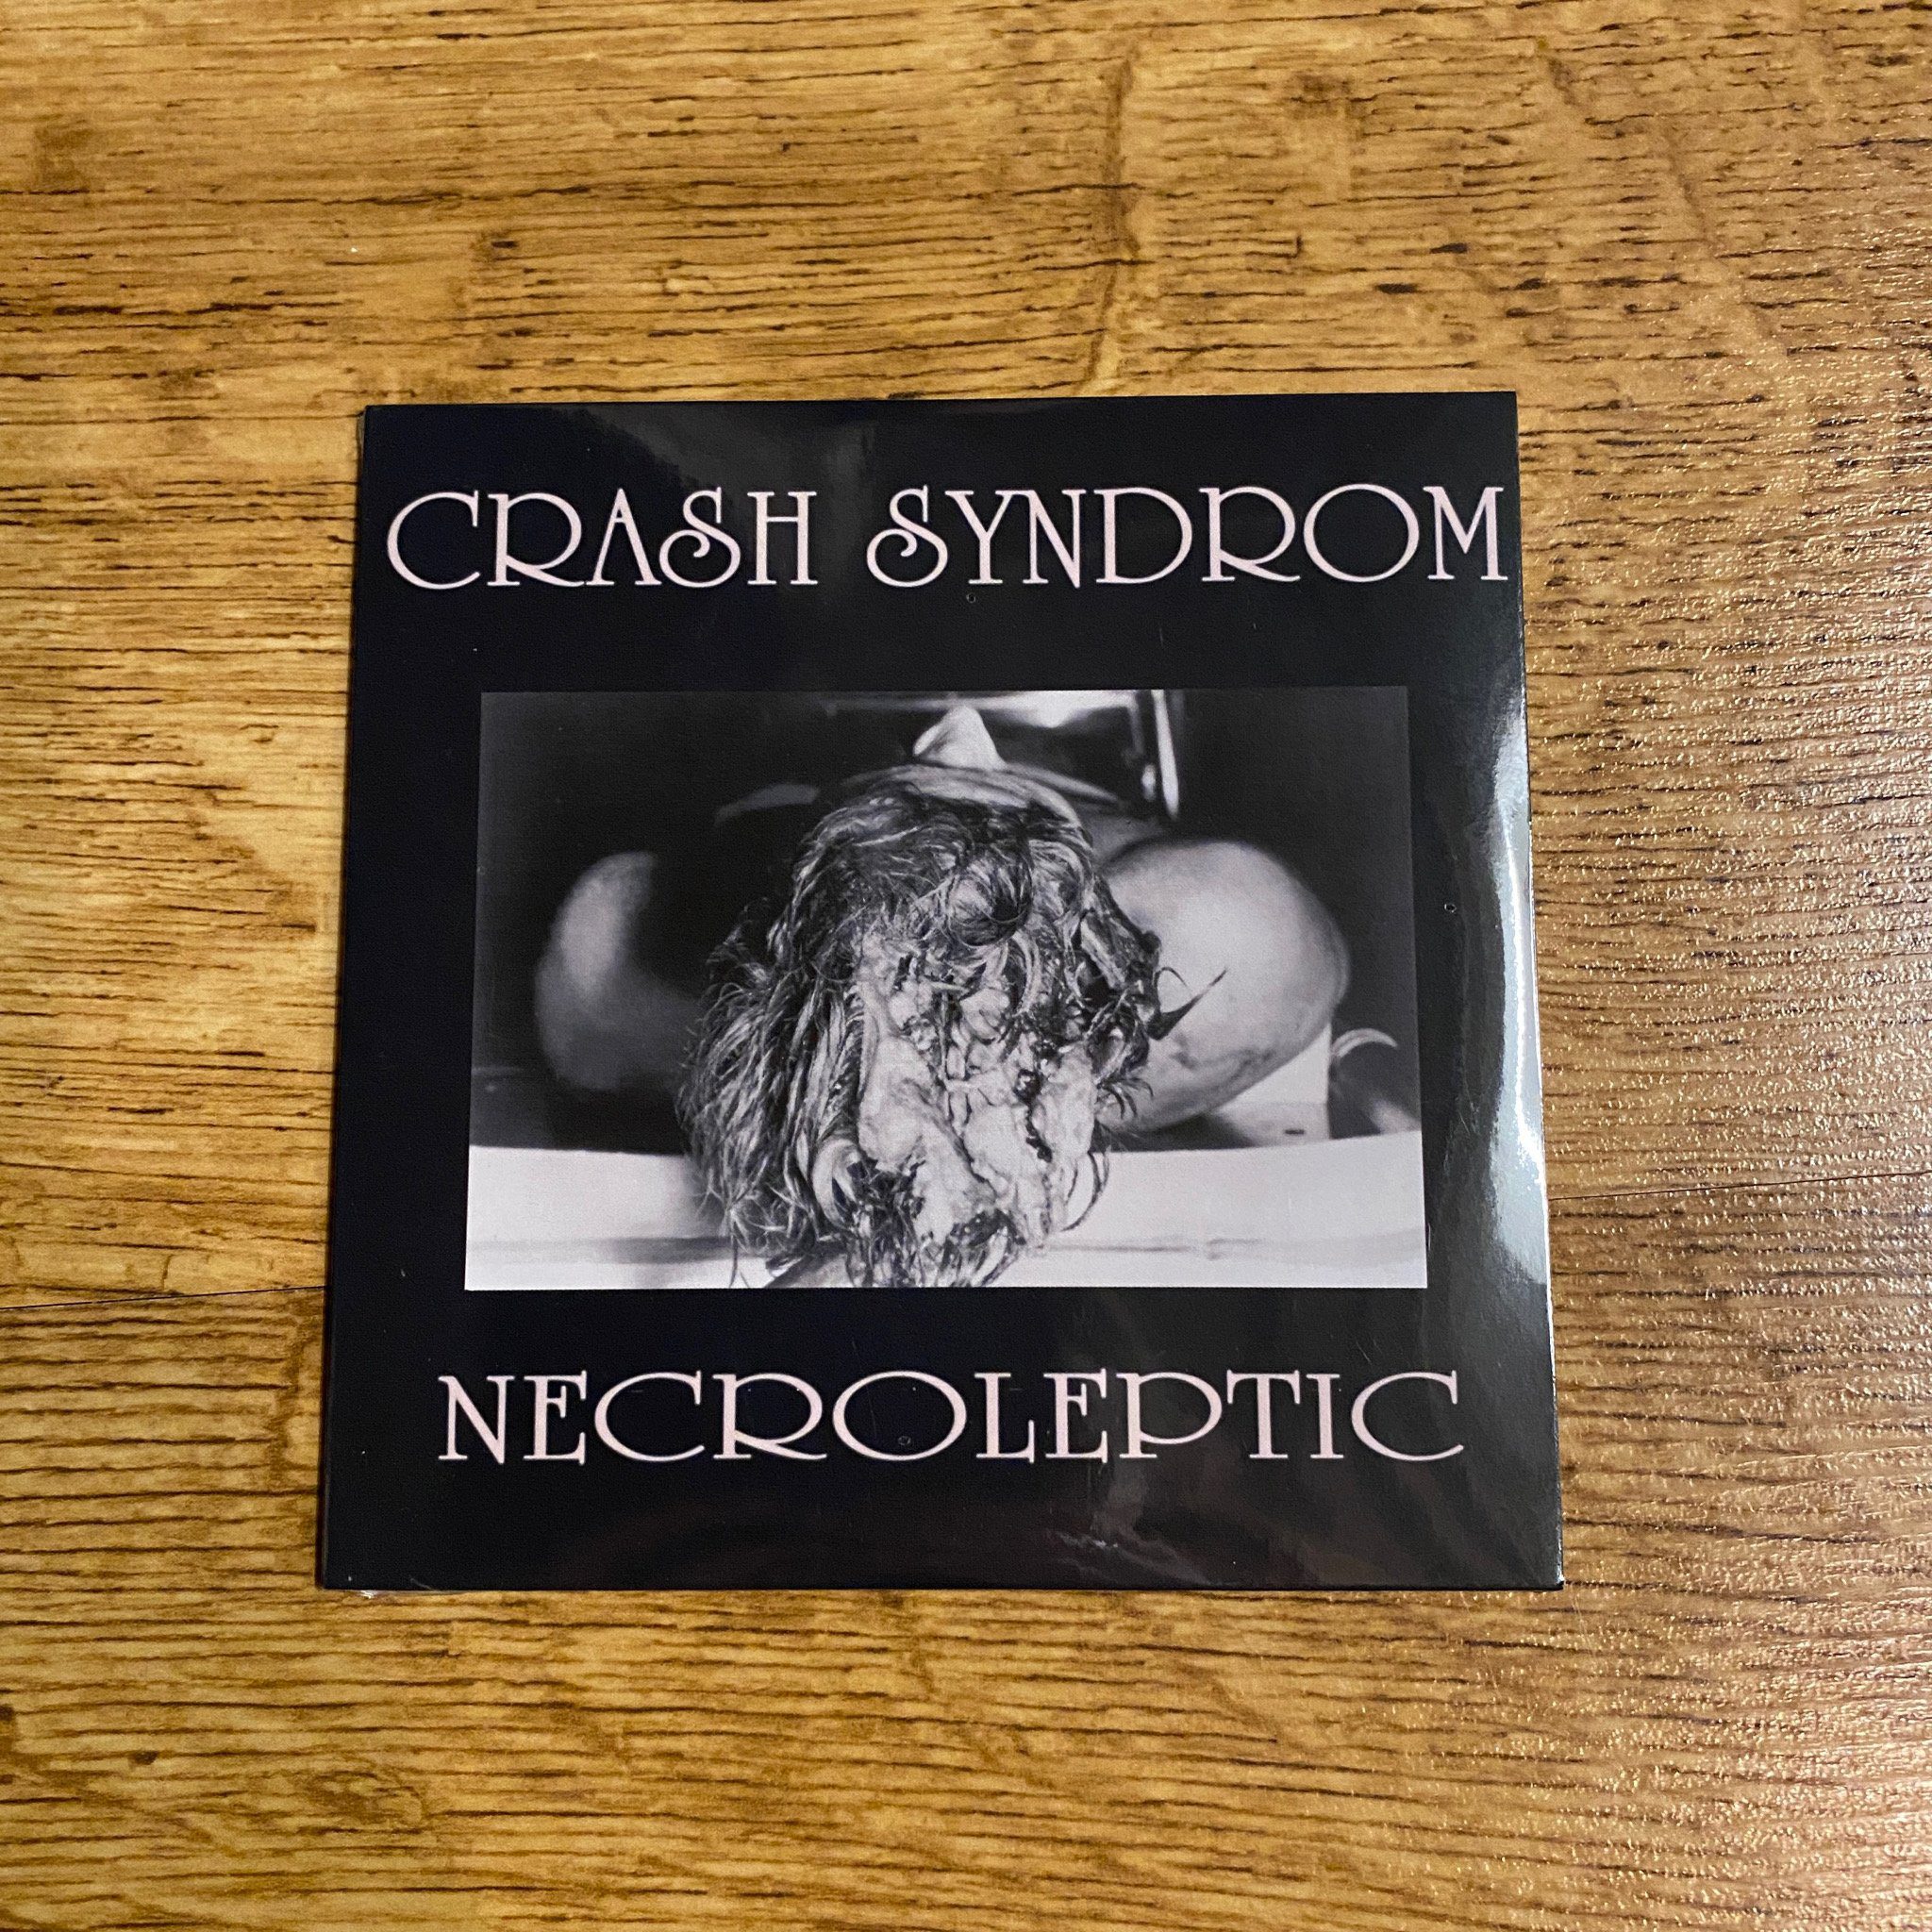 Photo of the Crash Syndrom - "Necroleptic" MCD